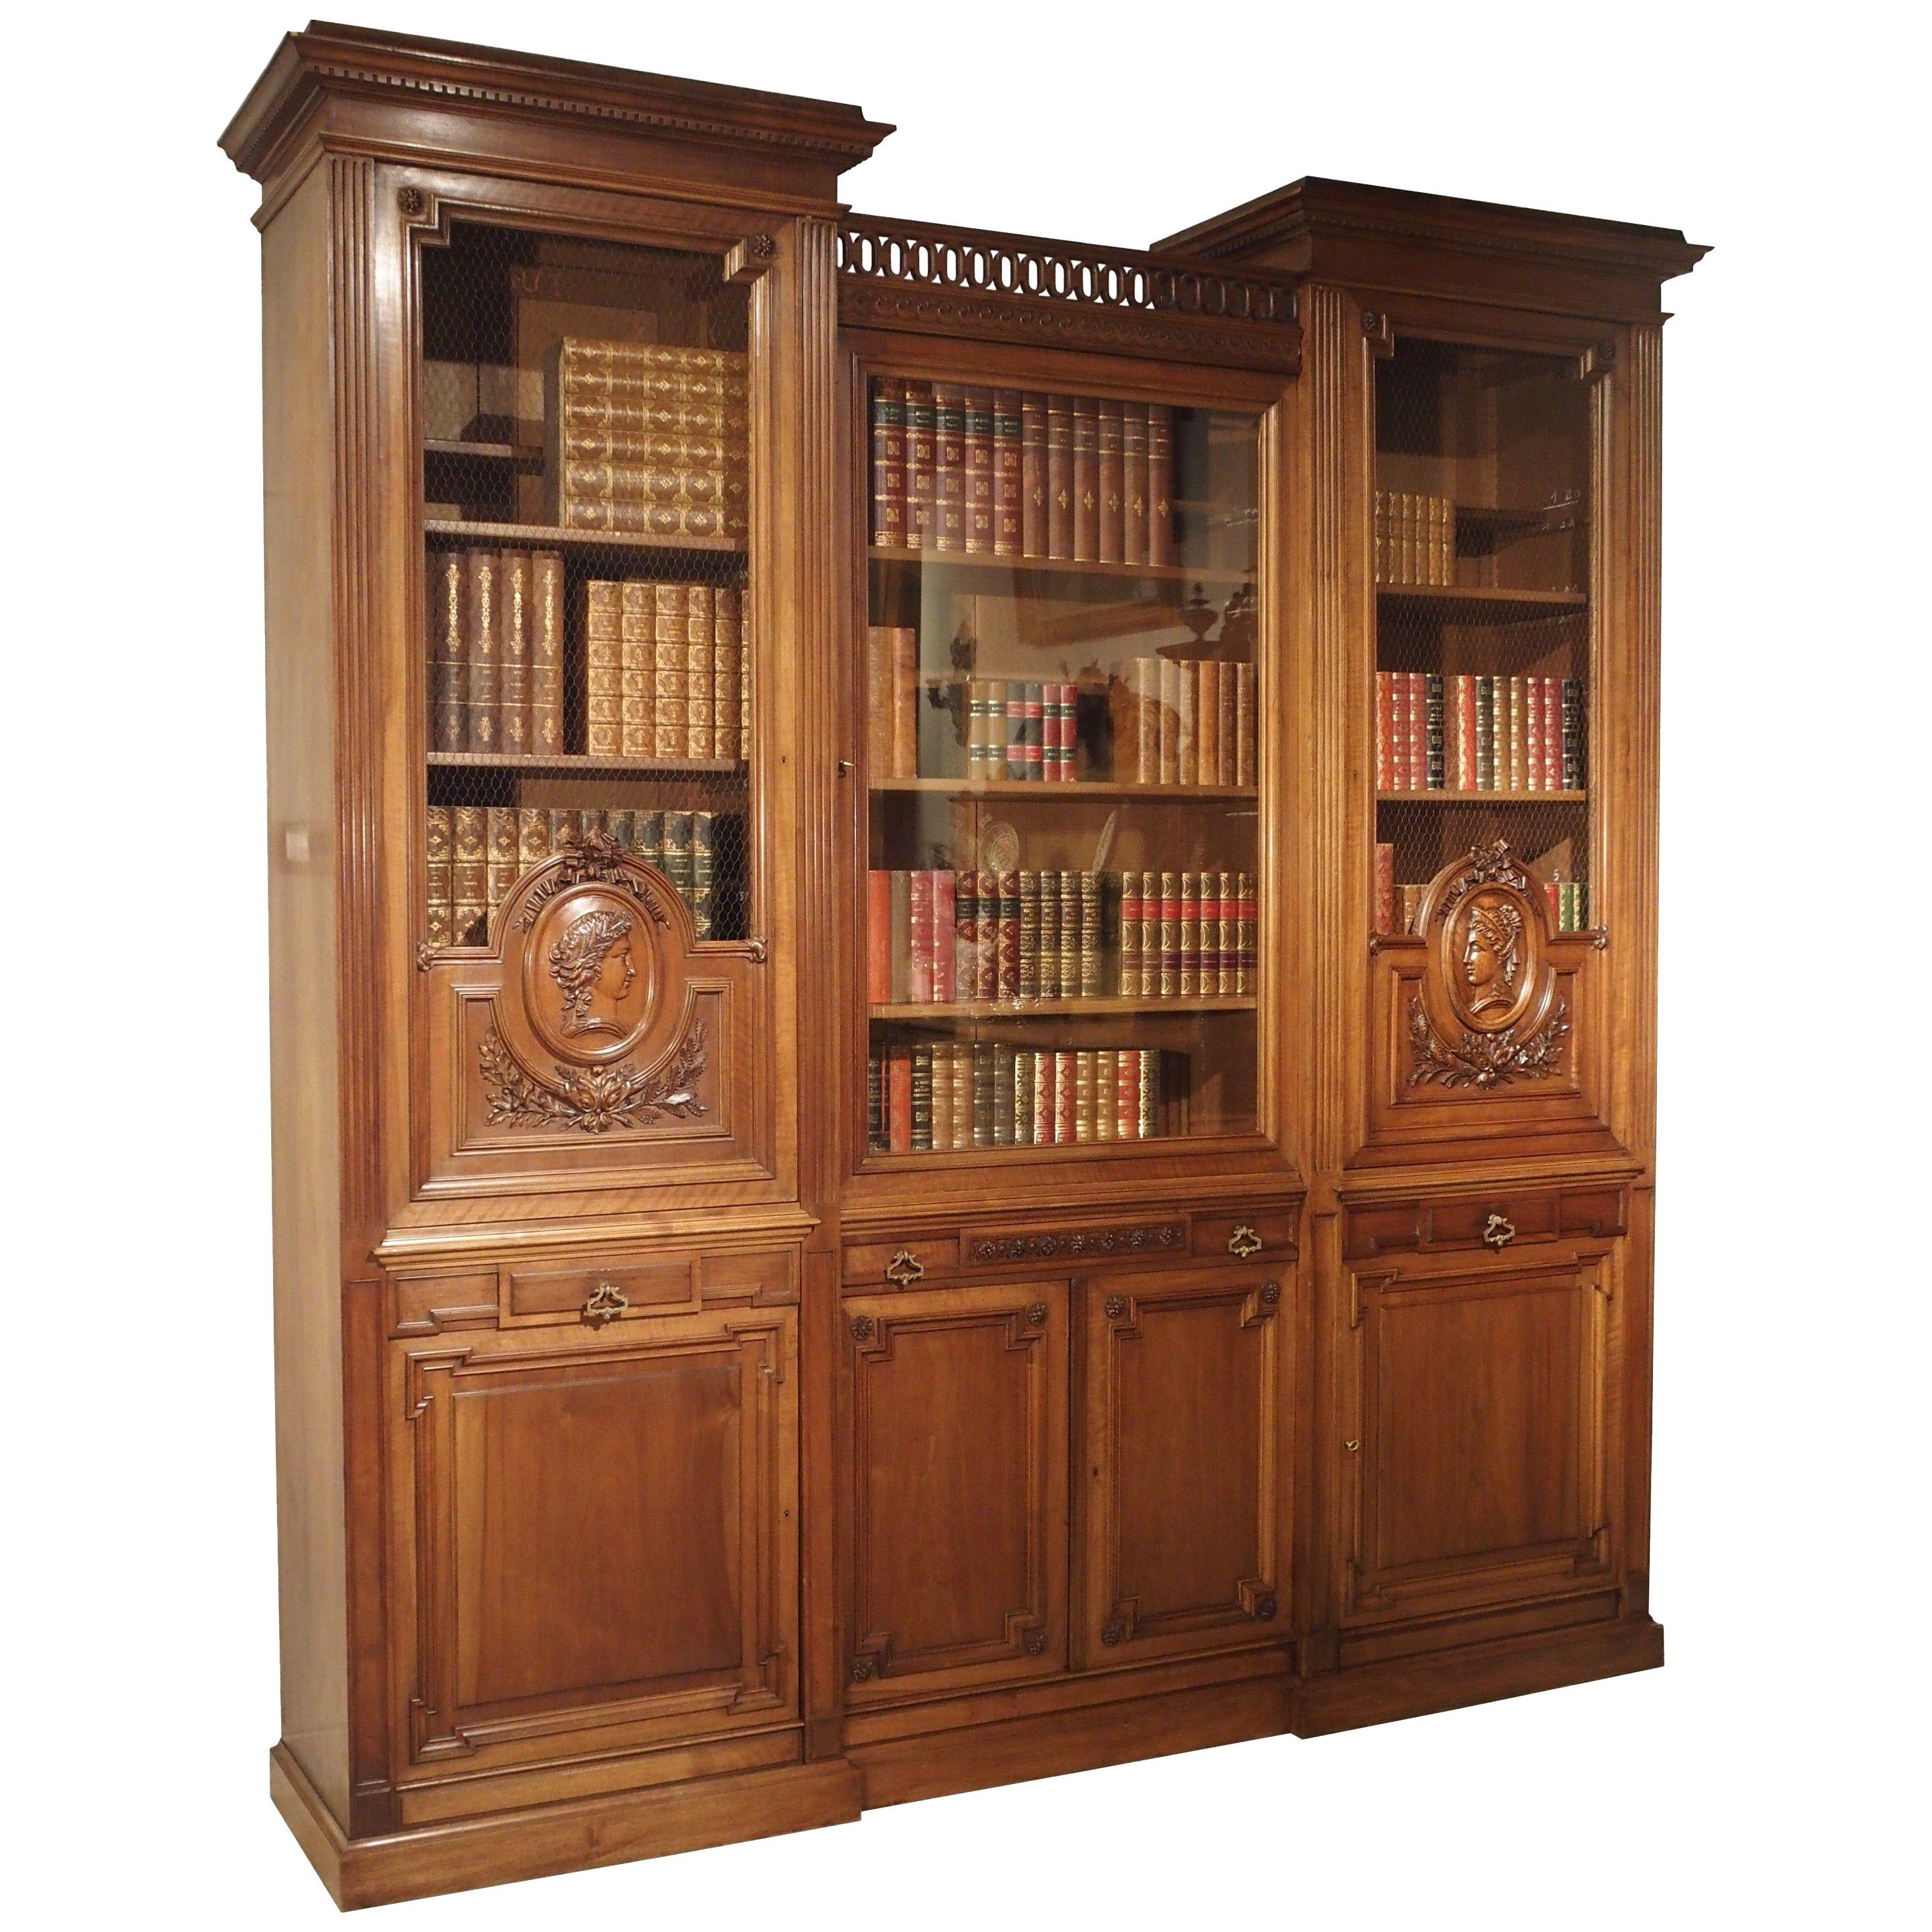 Antique Walnut Wood Louis XVI Style Bibliotheque from France, circa 1880